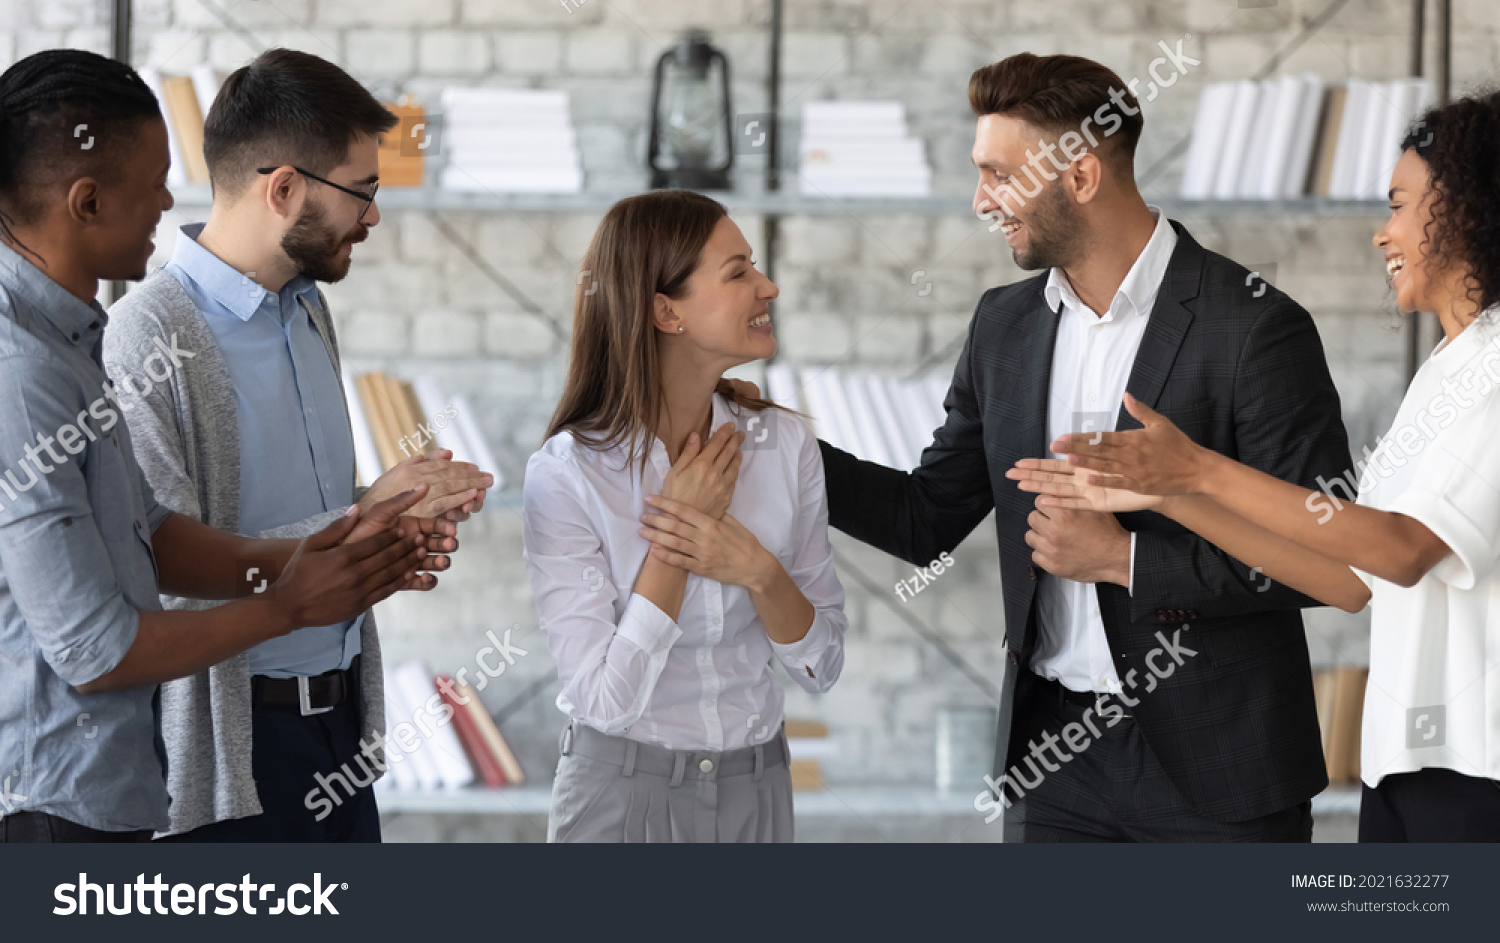 Smiling supportive diverse businesspeople congratulate excited young Caucasian female employee with job promotion or success. Happy multiethnic colleagues greeting woman worker with work achievement. #2021632277